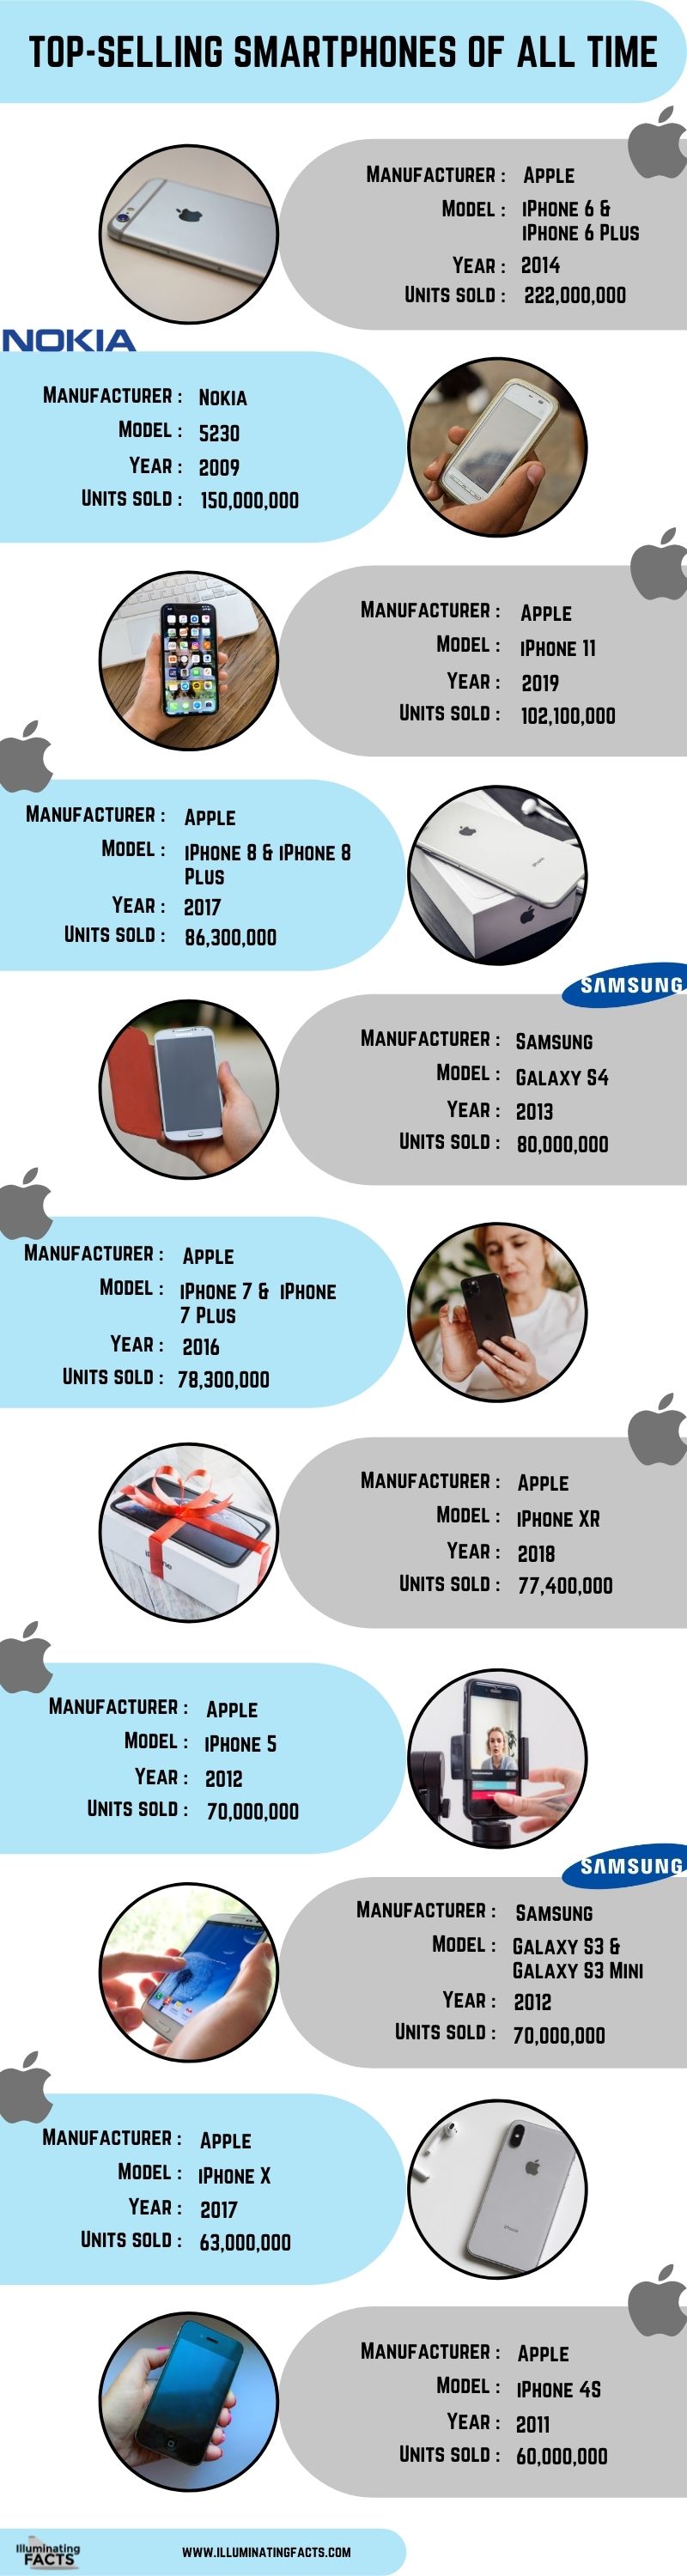 Top-selling smartphones of all time